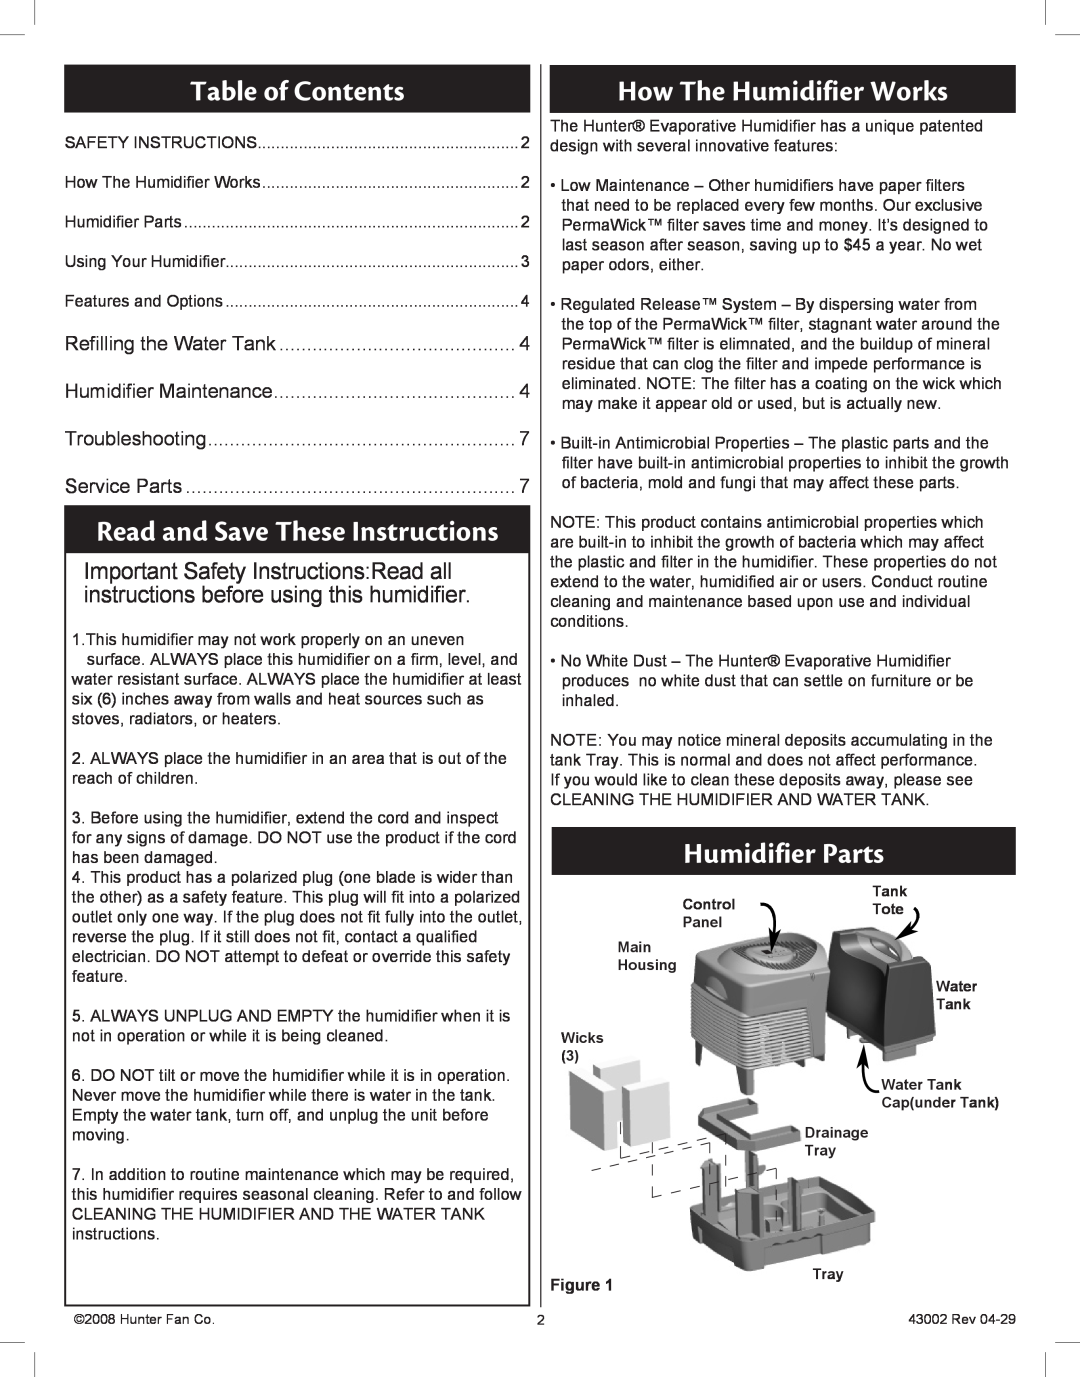 Hunter Fan 37407 Table of Contents, How The Humidifier Works, Humidifier Parts, Important Safety Instructions Read all 